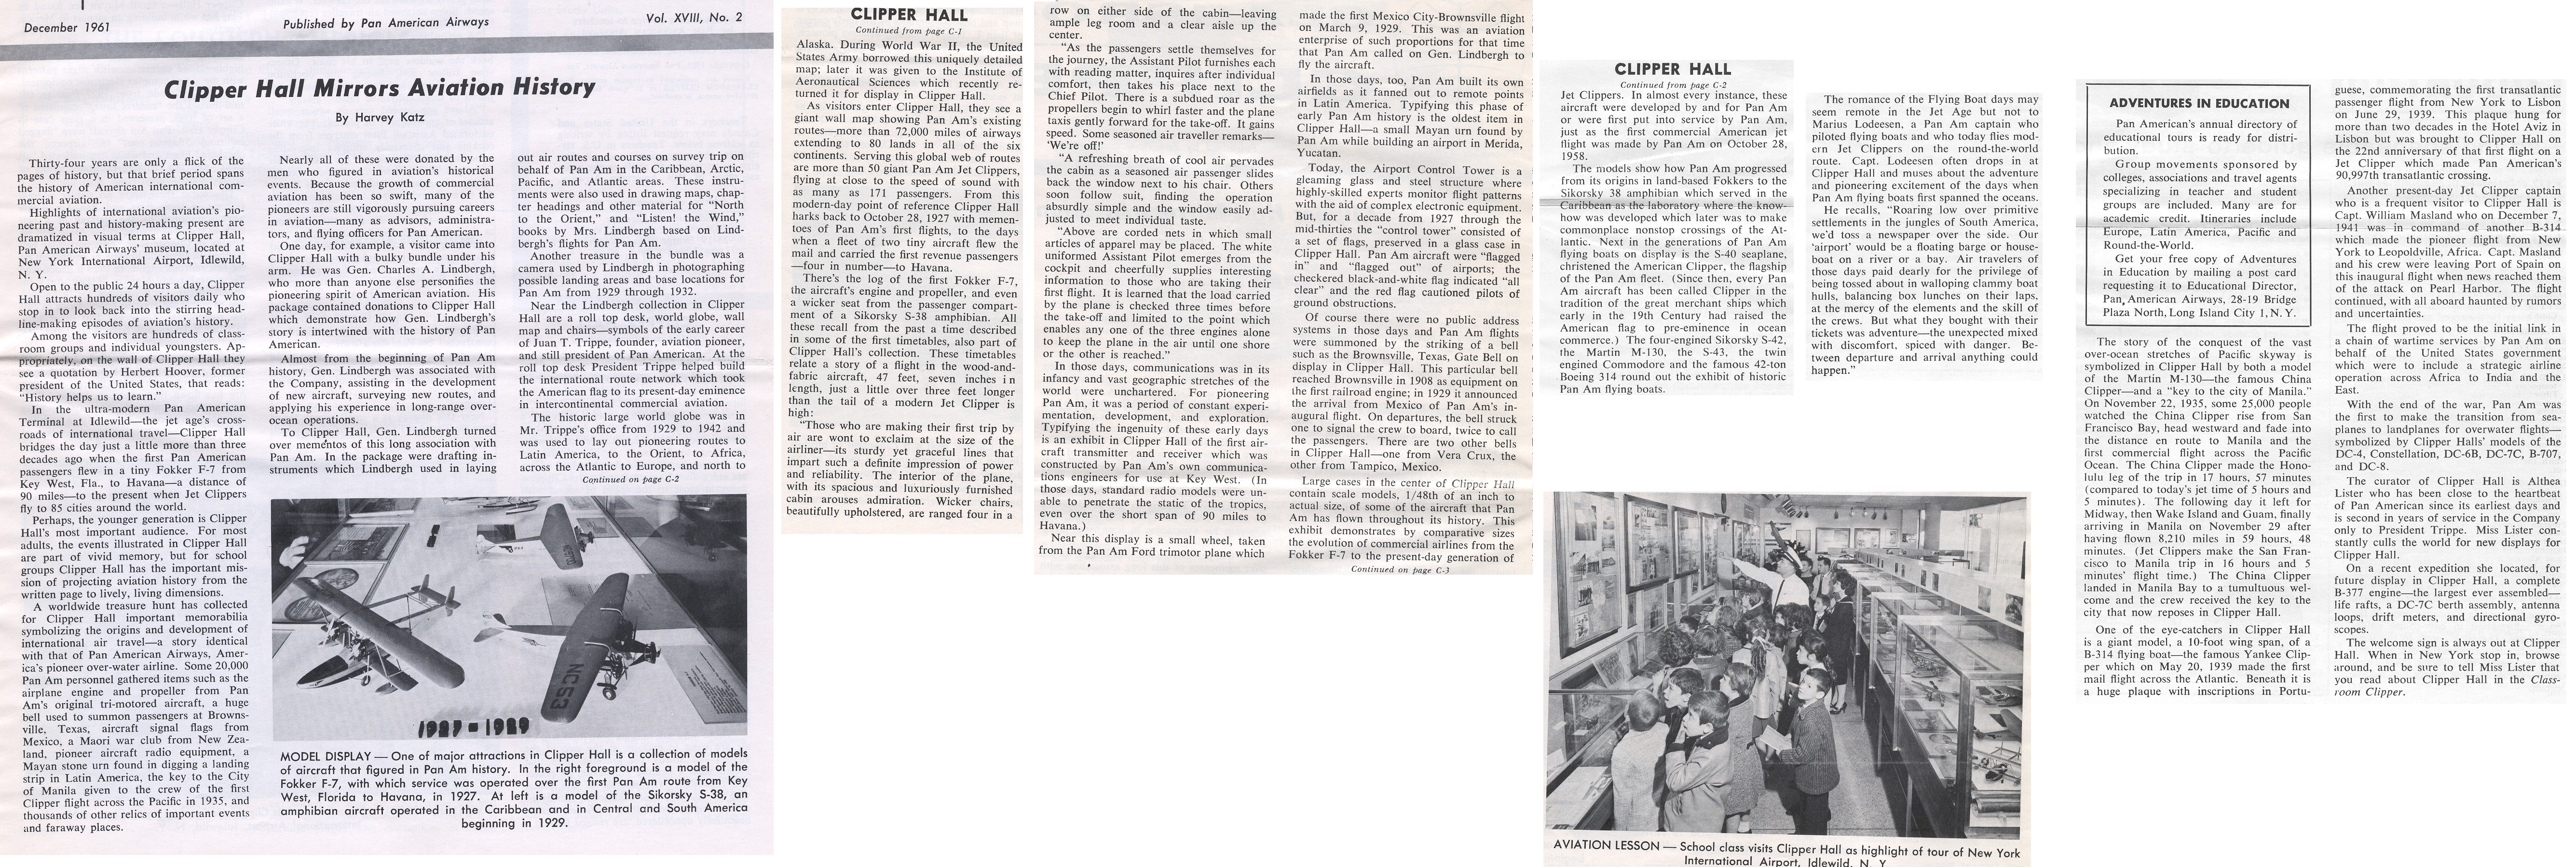 1961, December Article on Pan Am Clipper Hall at the Pan Am Airport Terminal in New York City.